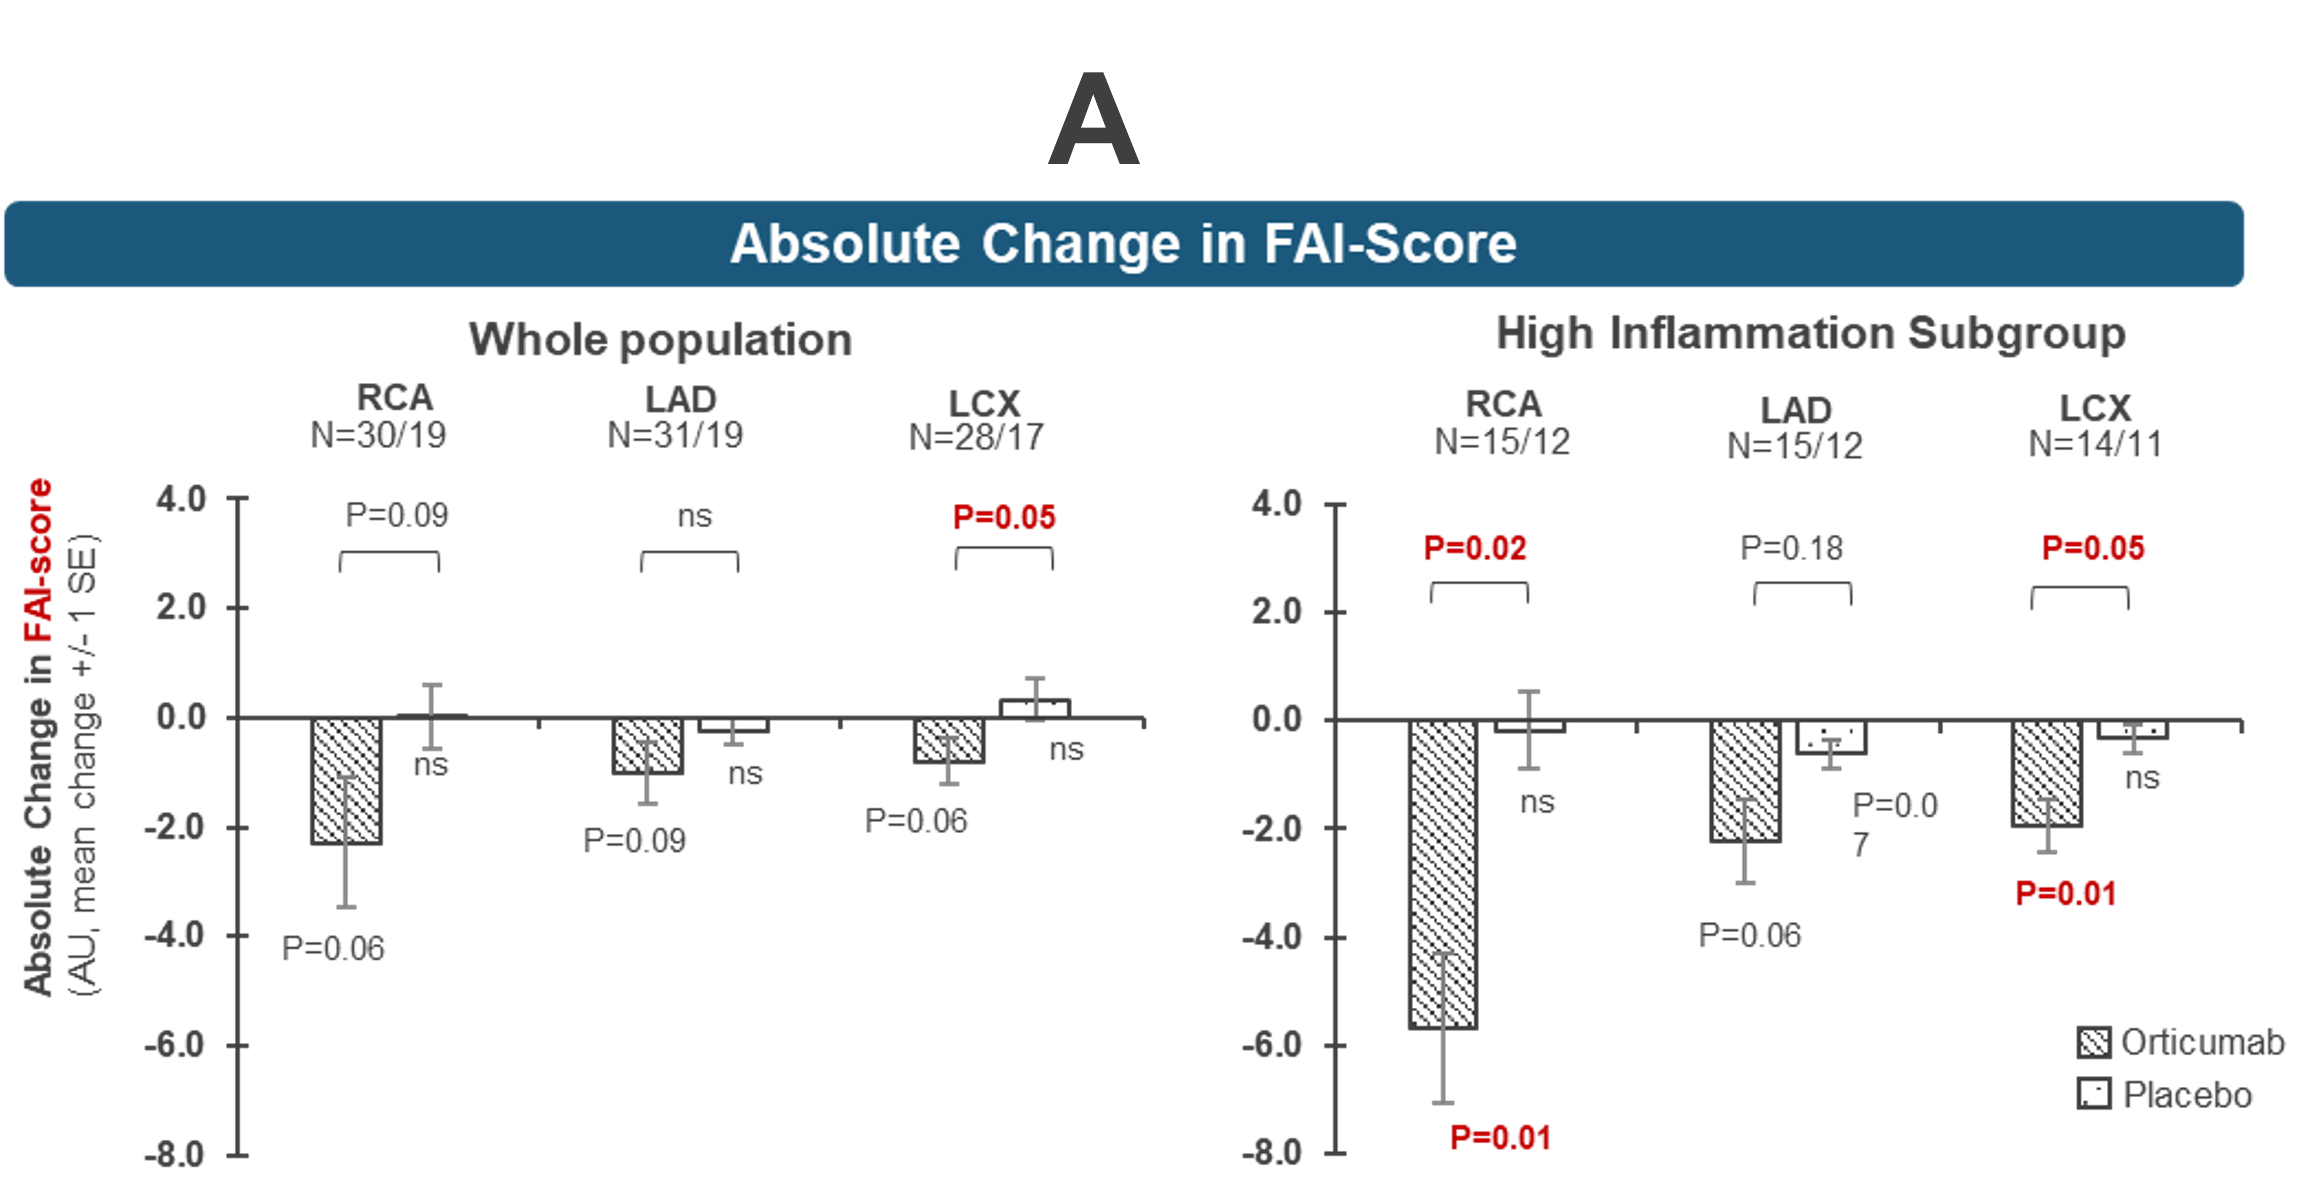 Chart A showing the results of clinical study, specifically the absolute change in FAI score between the whole population and high inflammation subgroup